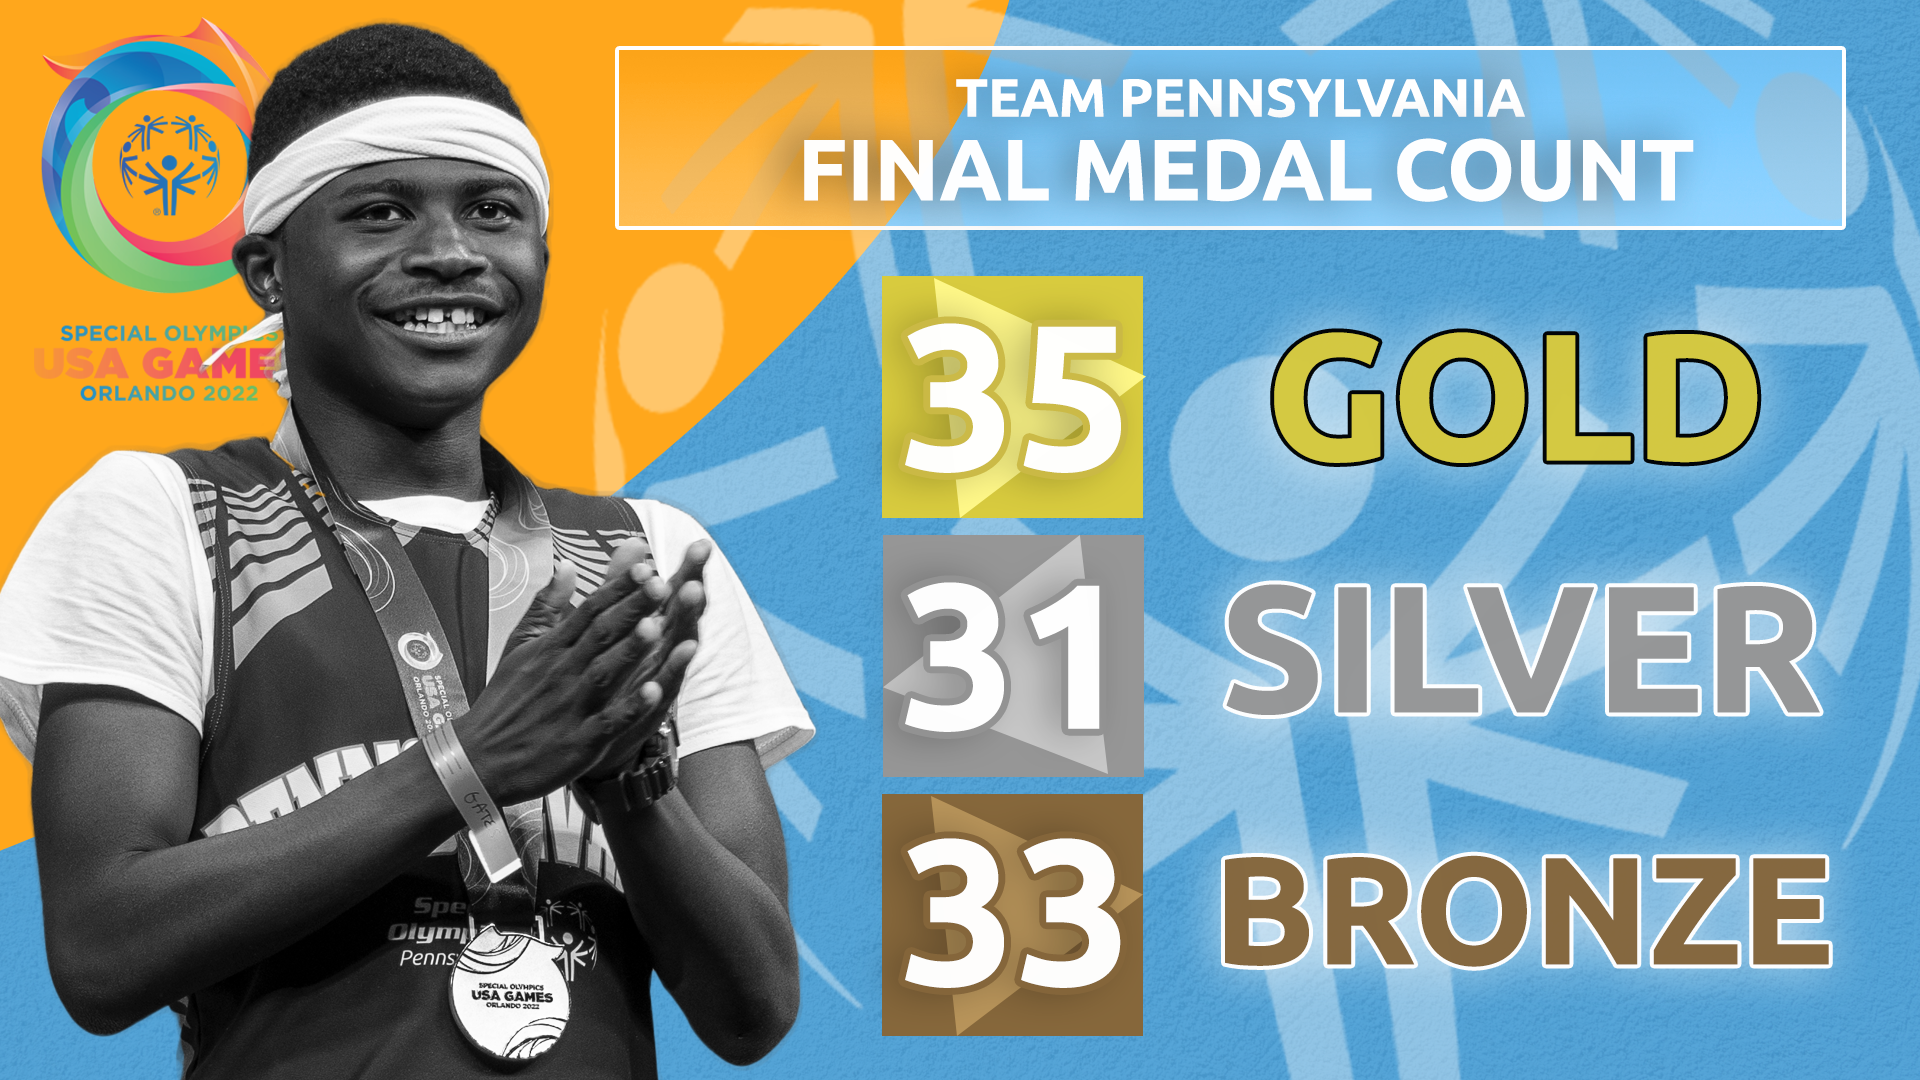 FINAL MEDAL COUNT